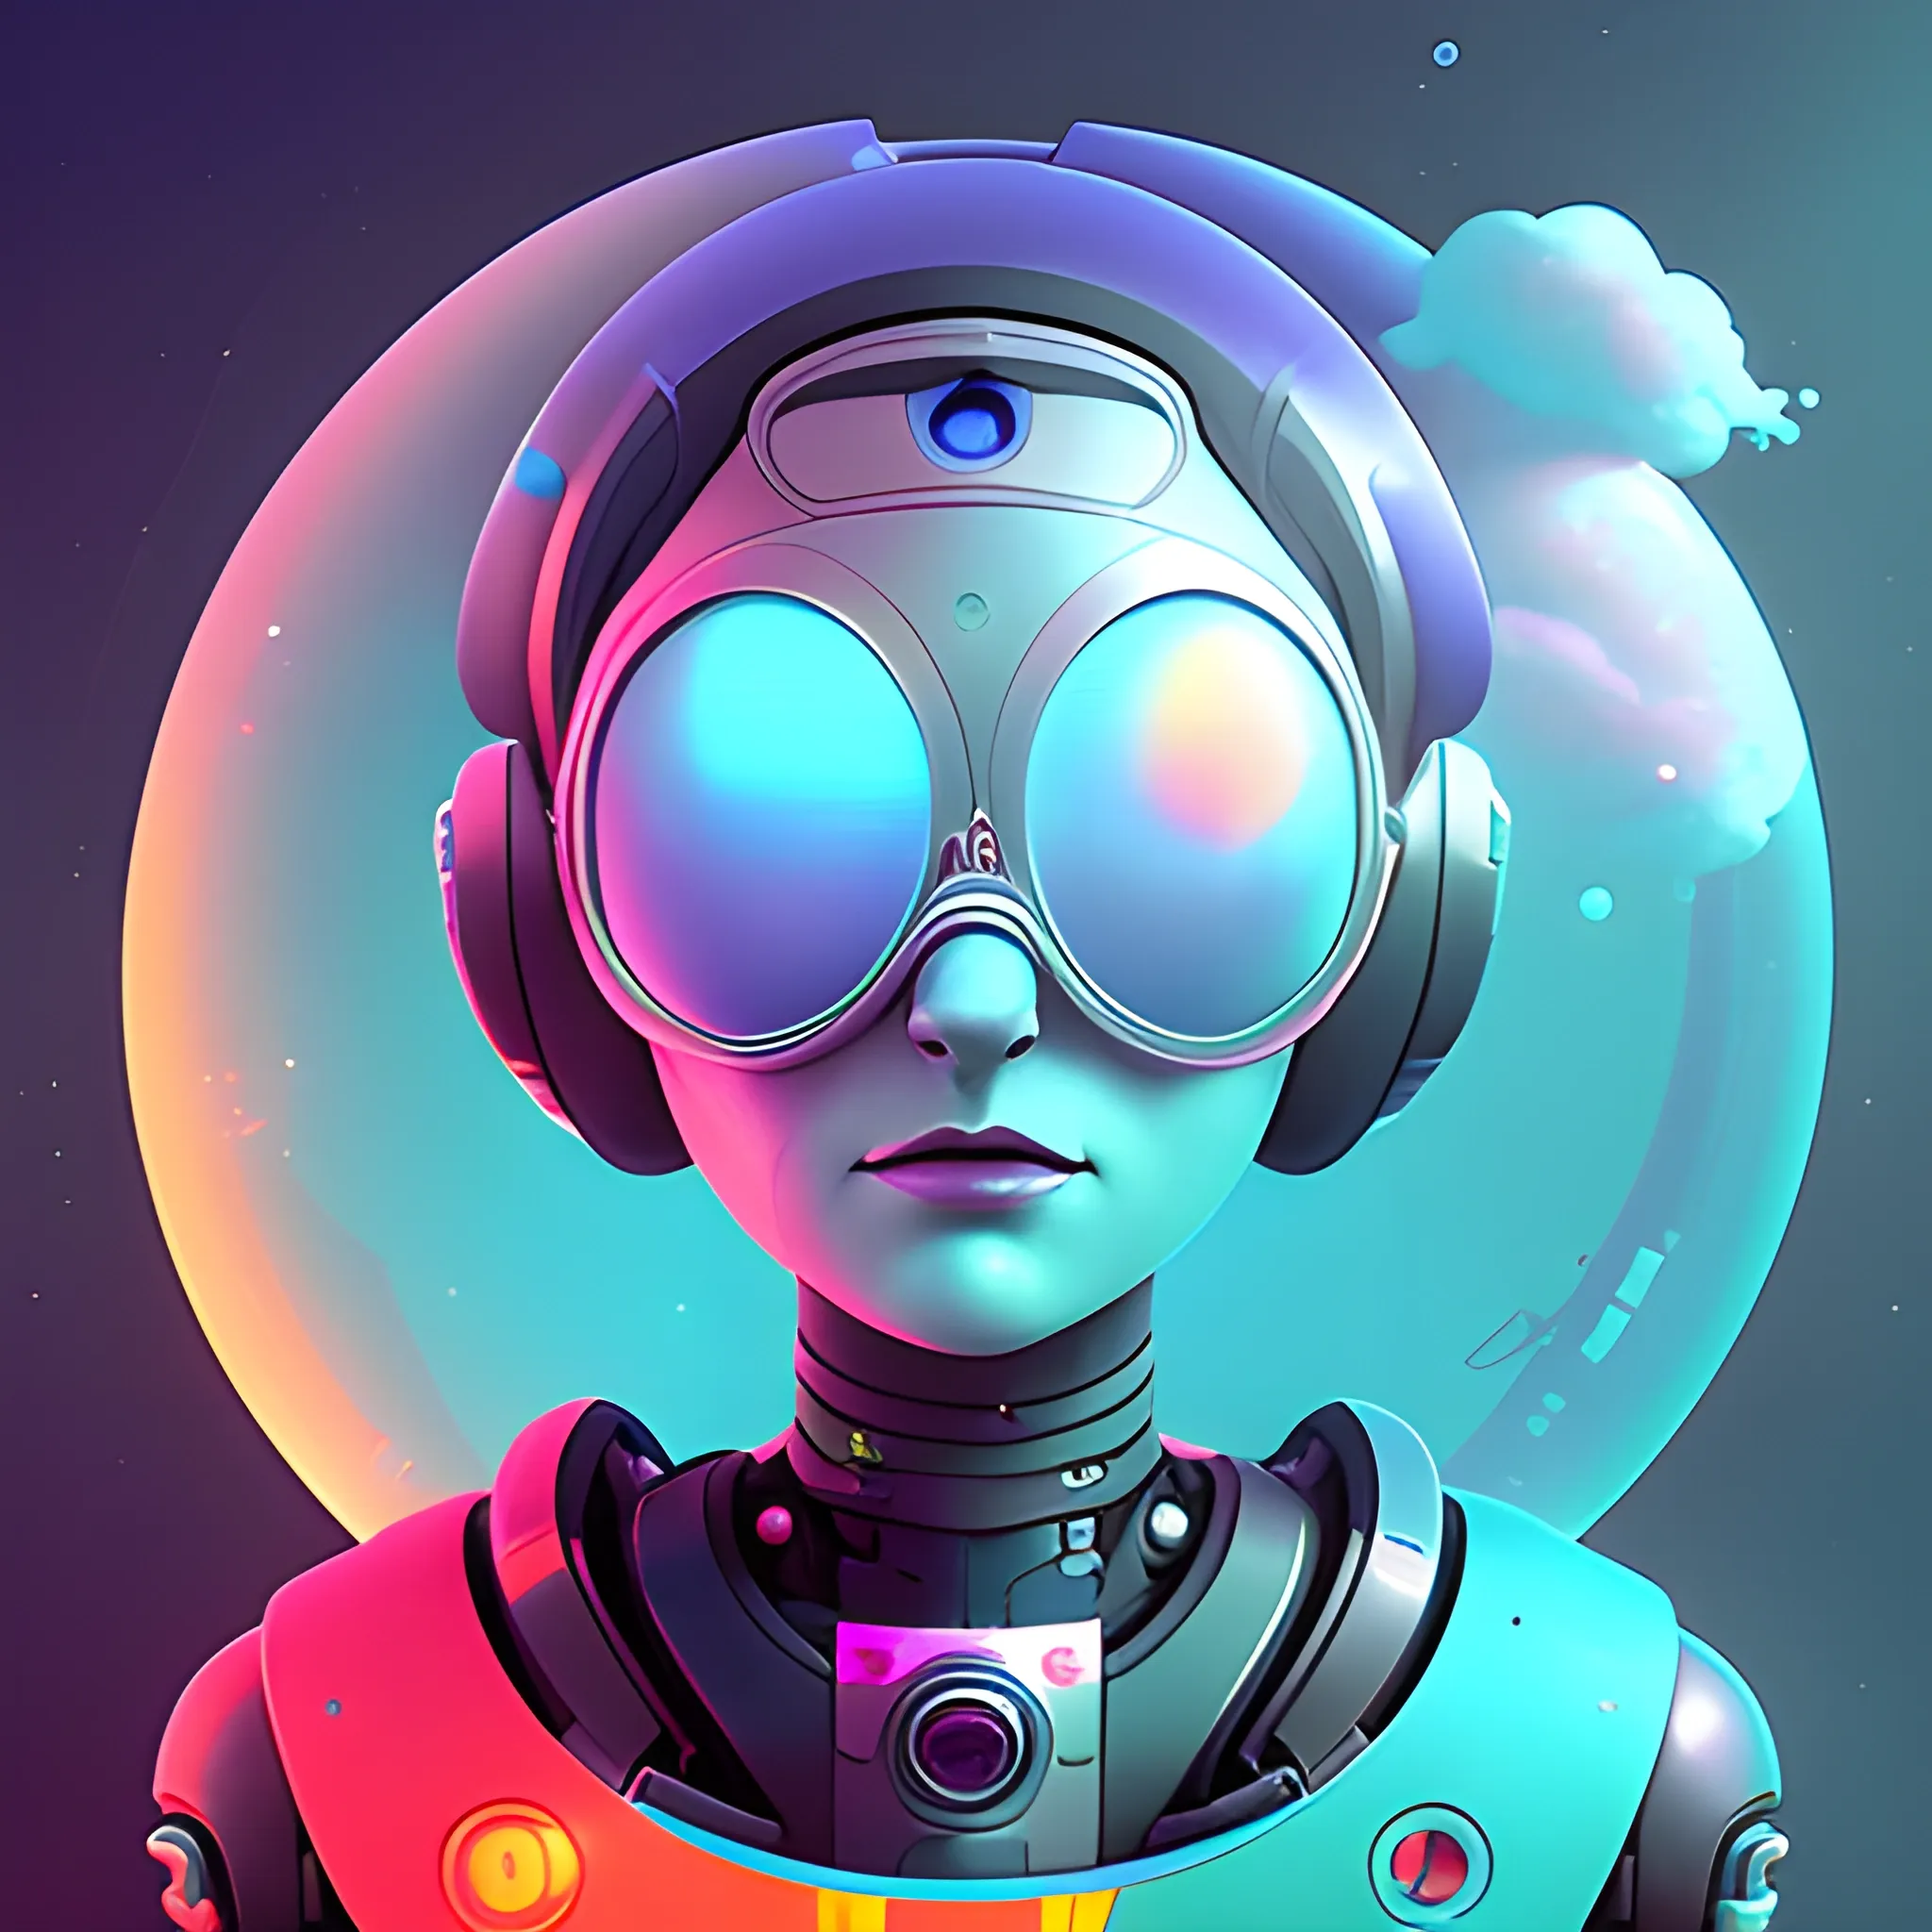 Friendly female robot avatar with government or institutional vibes. Should be cheerful, knowledgeable, and friendly. by petros afshar, ross tran, Tom Bagshaw, tom whalen, underwater bubbly psychedelic clouds, Anaglyph 3D lens blur effect
